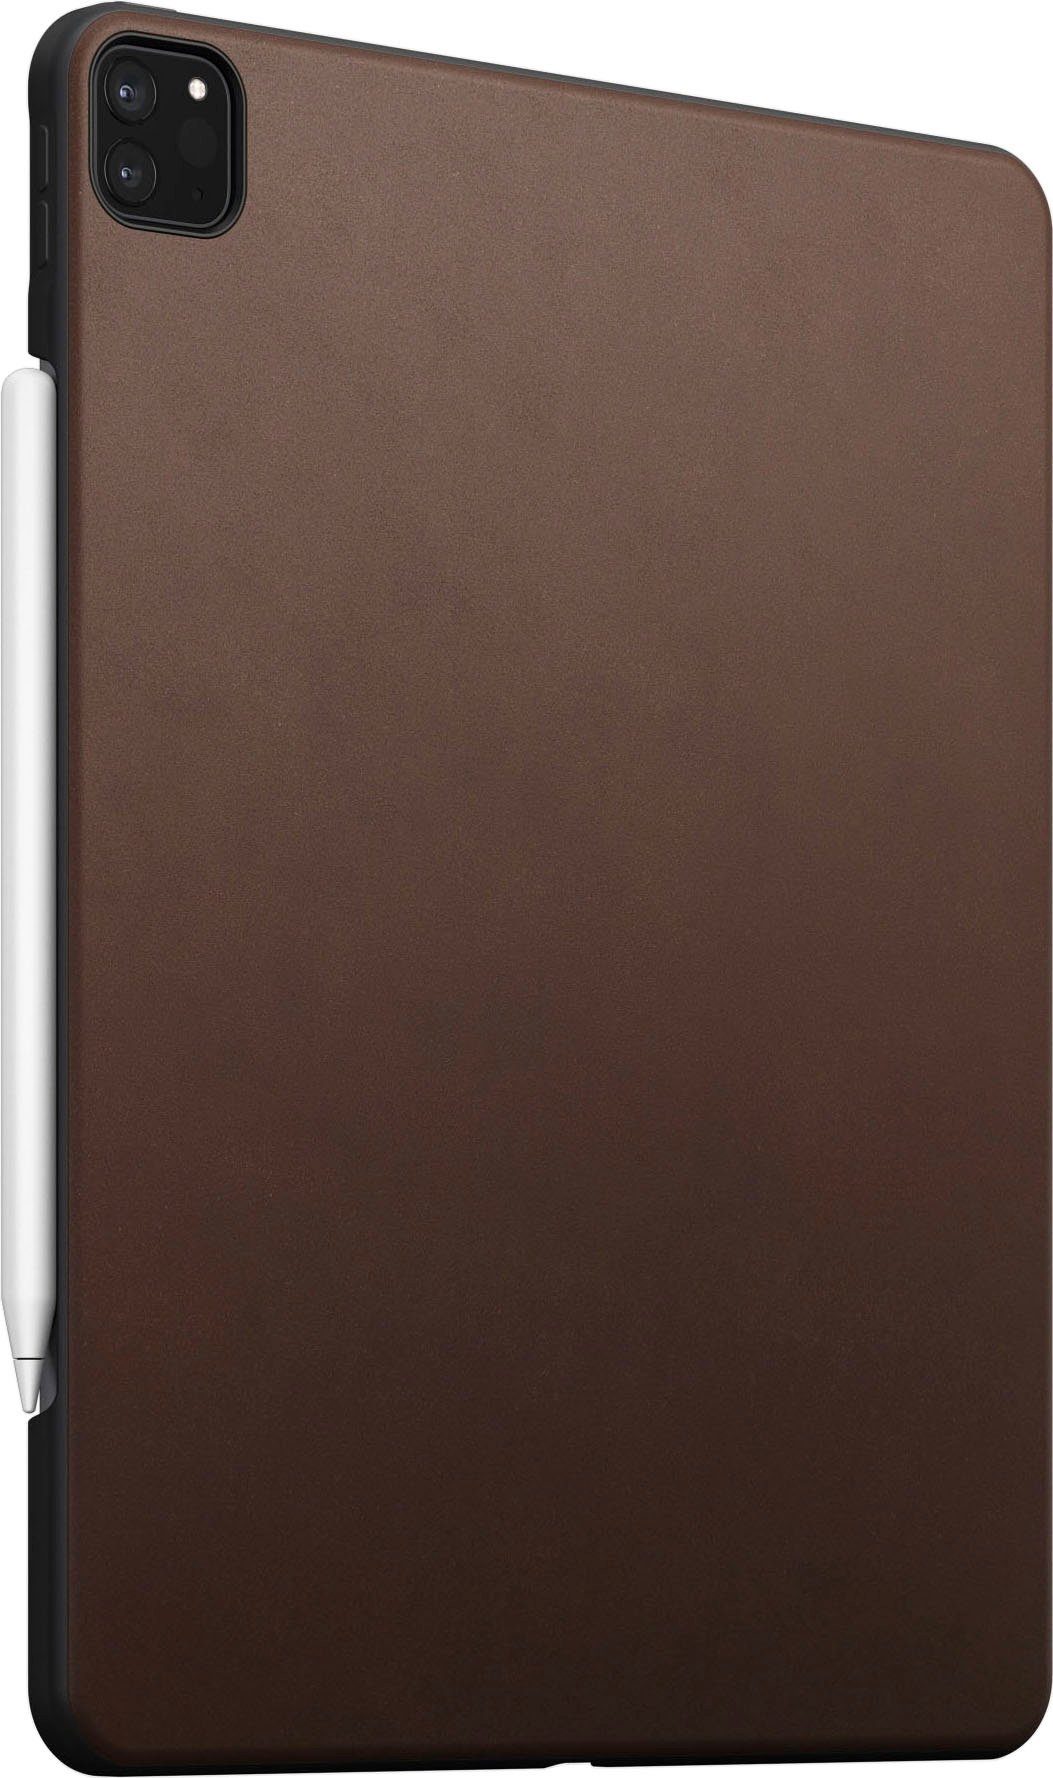 Nomad Tablet-Hülle "Modern Leather Case" iPad Pro 12,9" (4. Generation) 32,8 cm (12,9 Zoll)